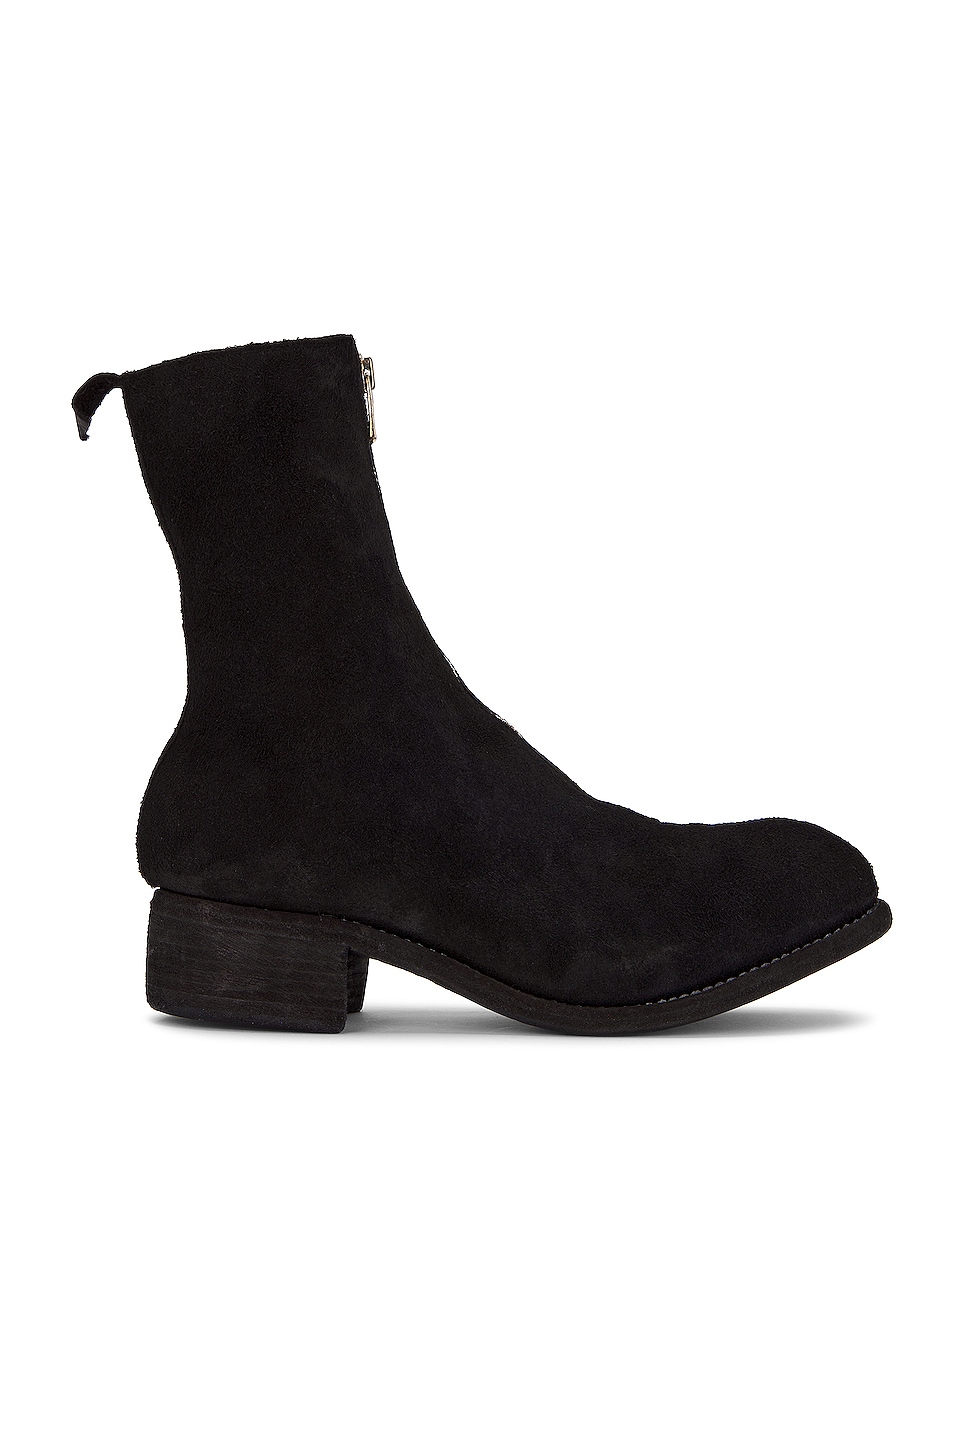 Image 1 of Guidi Pl2 Front Zip Boot in Black Suede